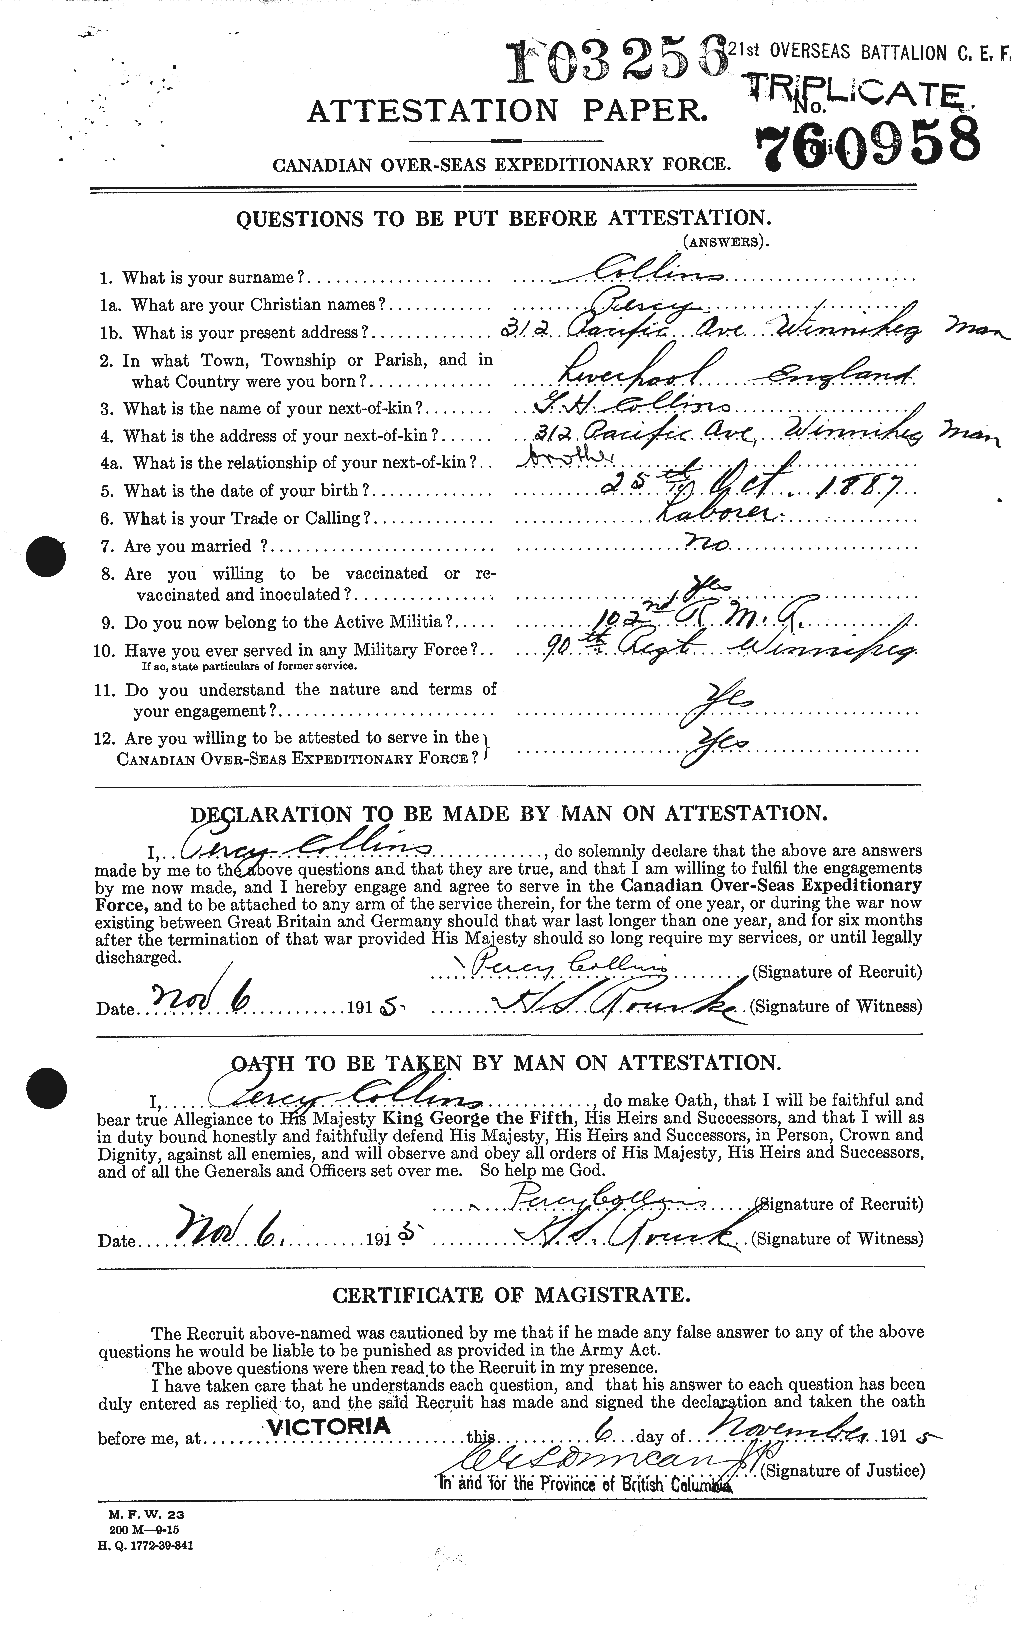 Personnel Records of the First World War - CEF 069300a